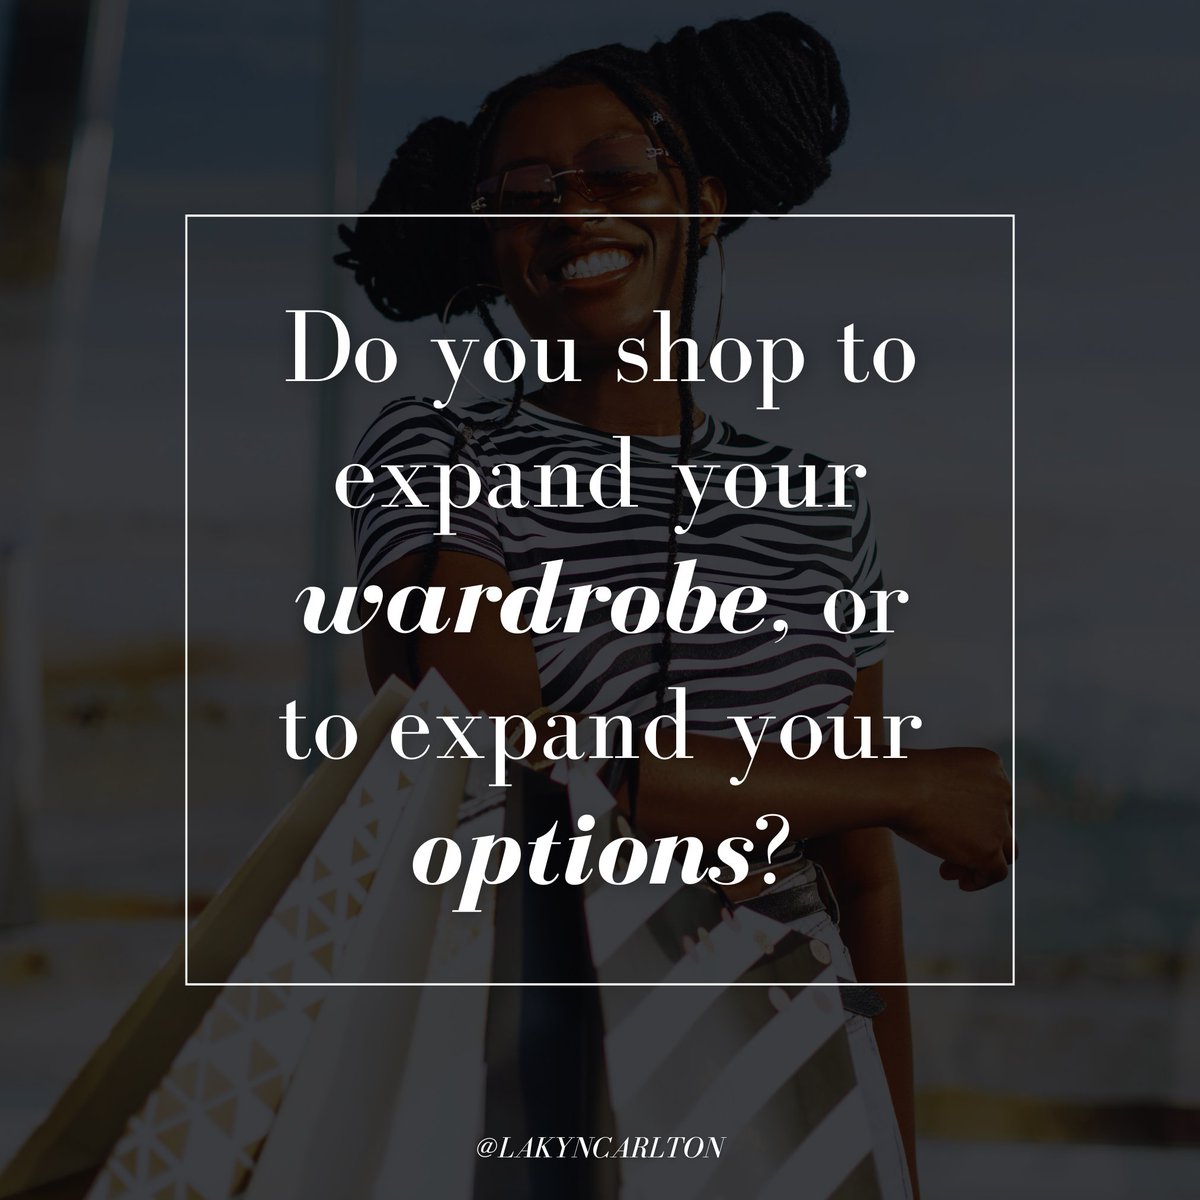 Every piece you purchase should, in some way, build on what you already have. No garment is an island! If you are not shopping to meet a need, and to make what you own even more styleable/wearable, you're likely shopping just to shop. Shop to *wear*, not to *have*!